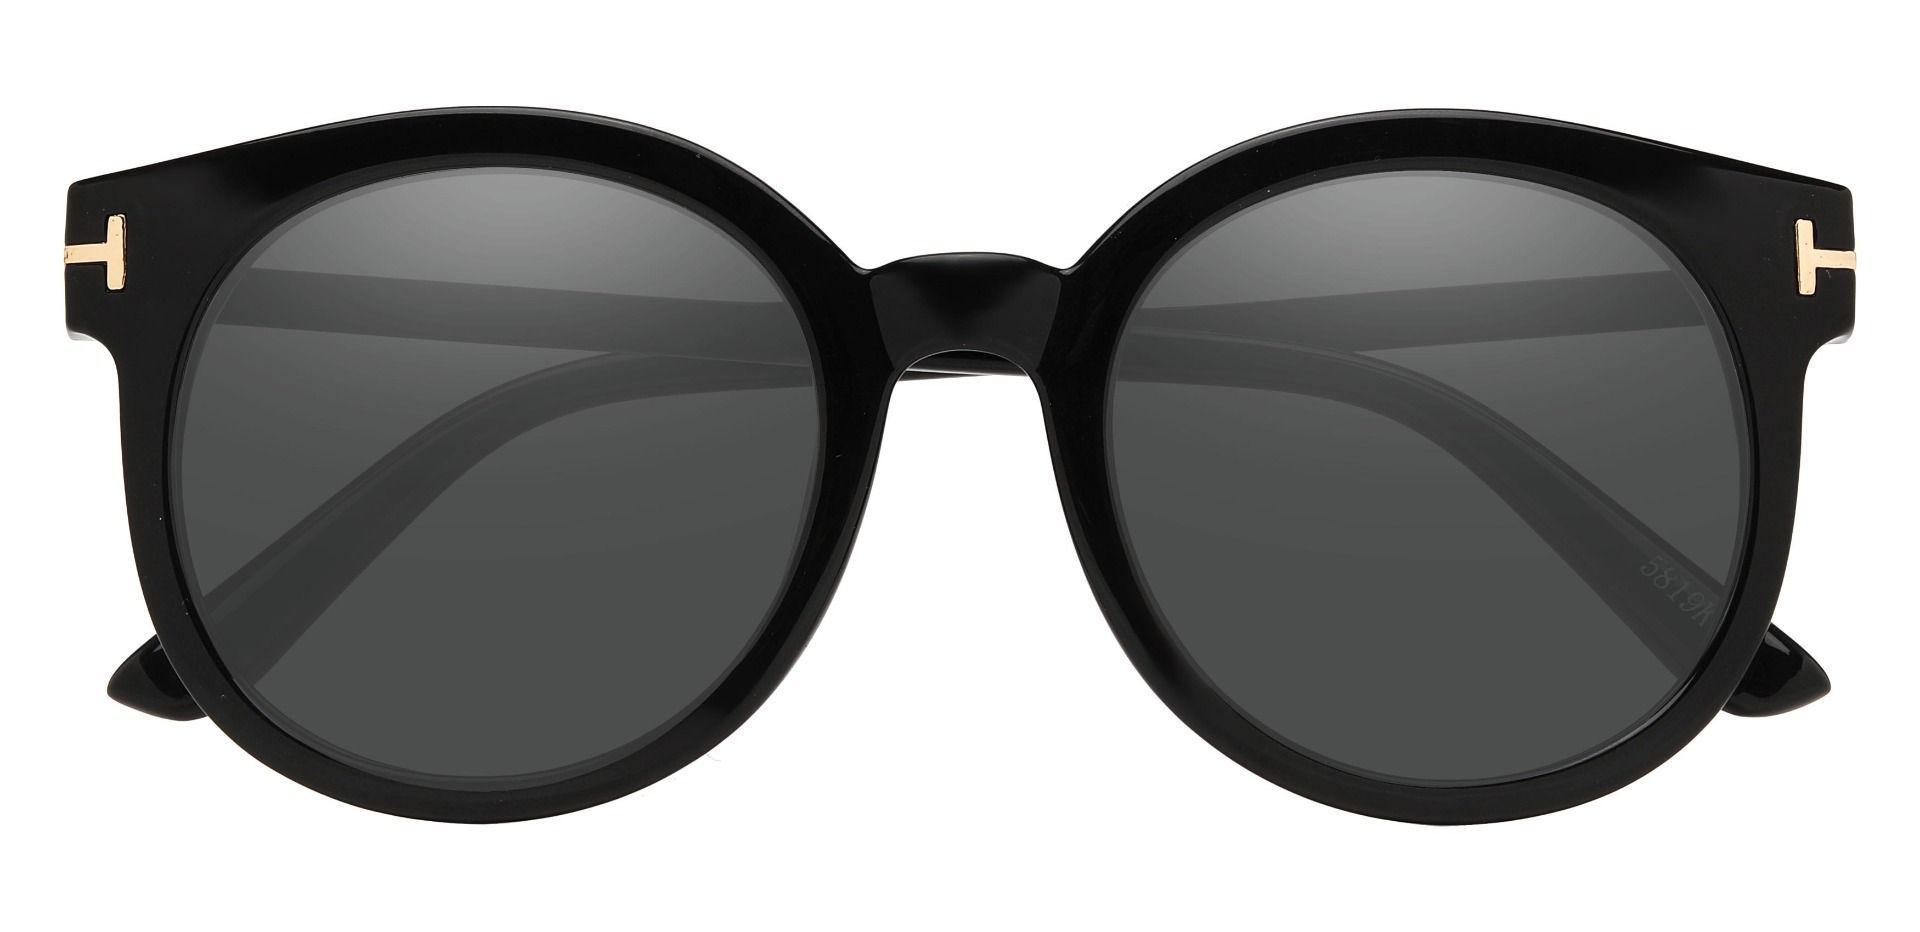 Fortuna Round Single Vision Sunglasses - Black Frame With Gray Lenses